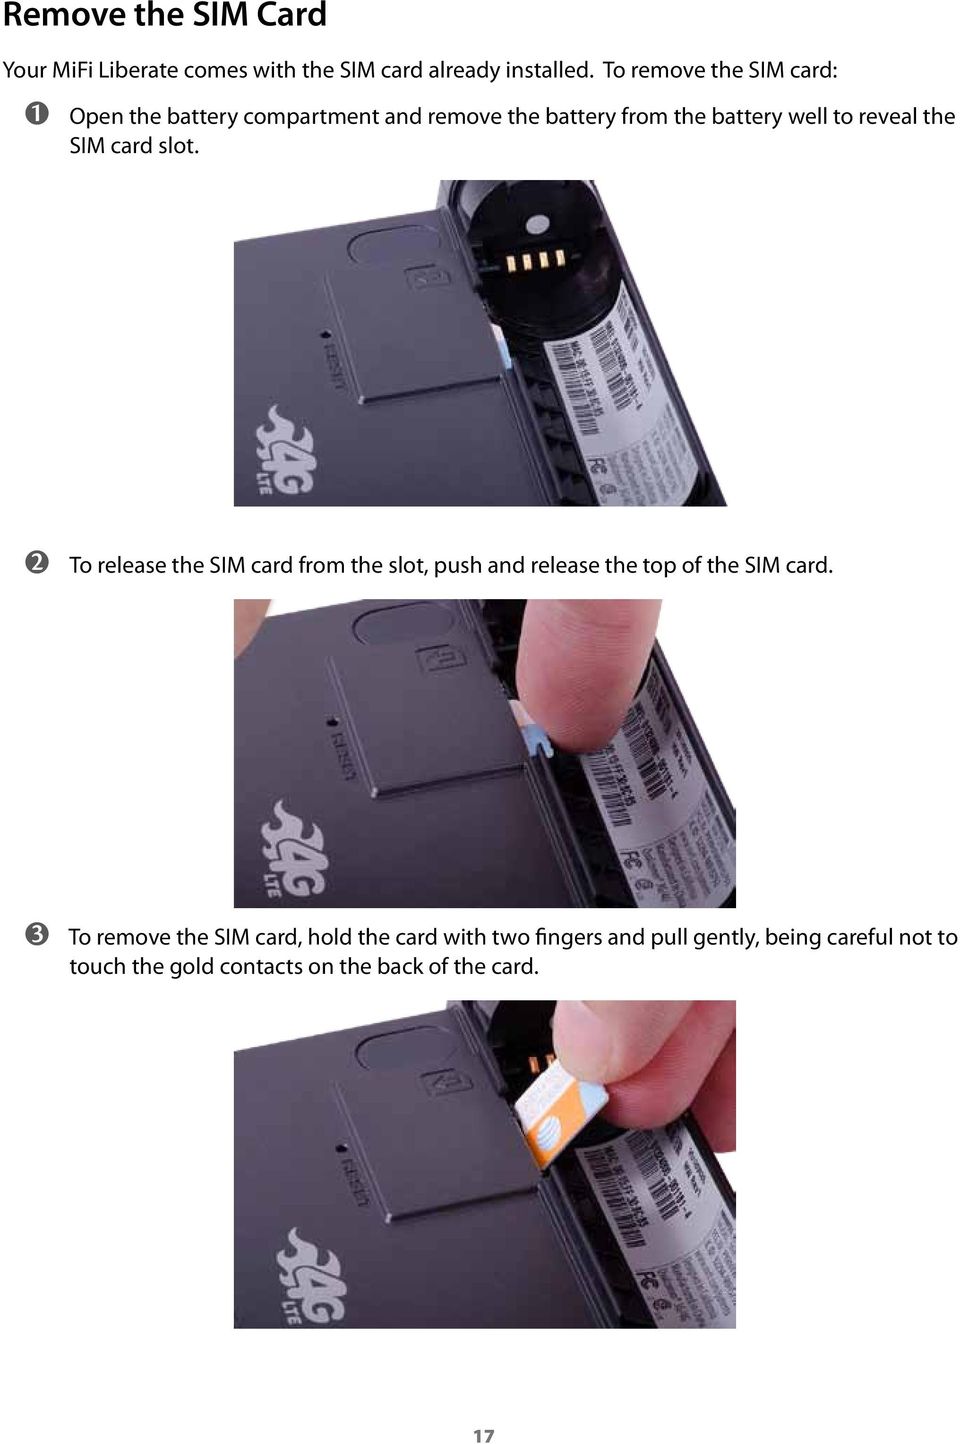 the SIM card slot. ➋➋ To release the SIM card from the slot, push and release the top of the SIM card.